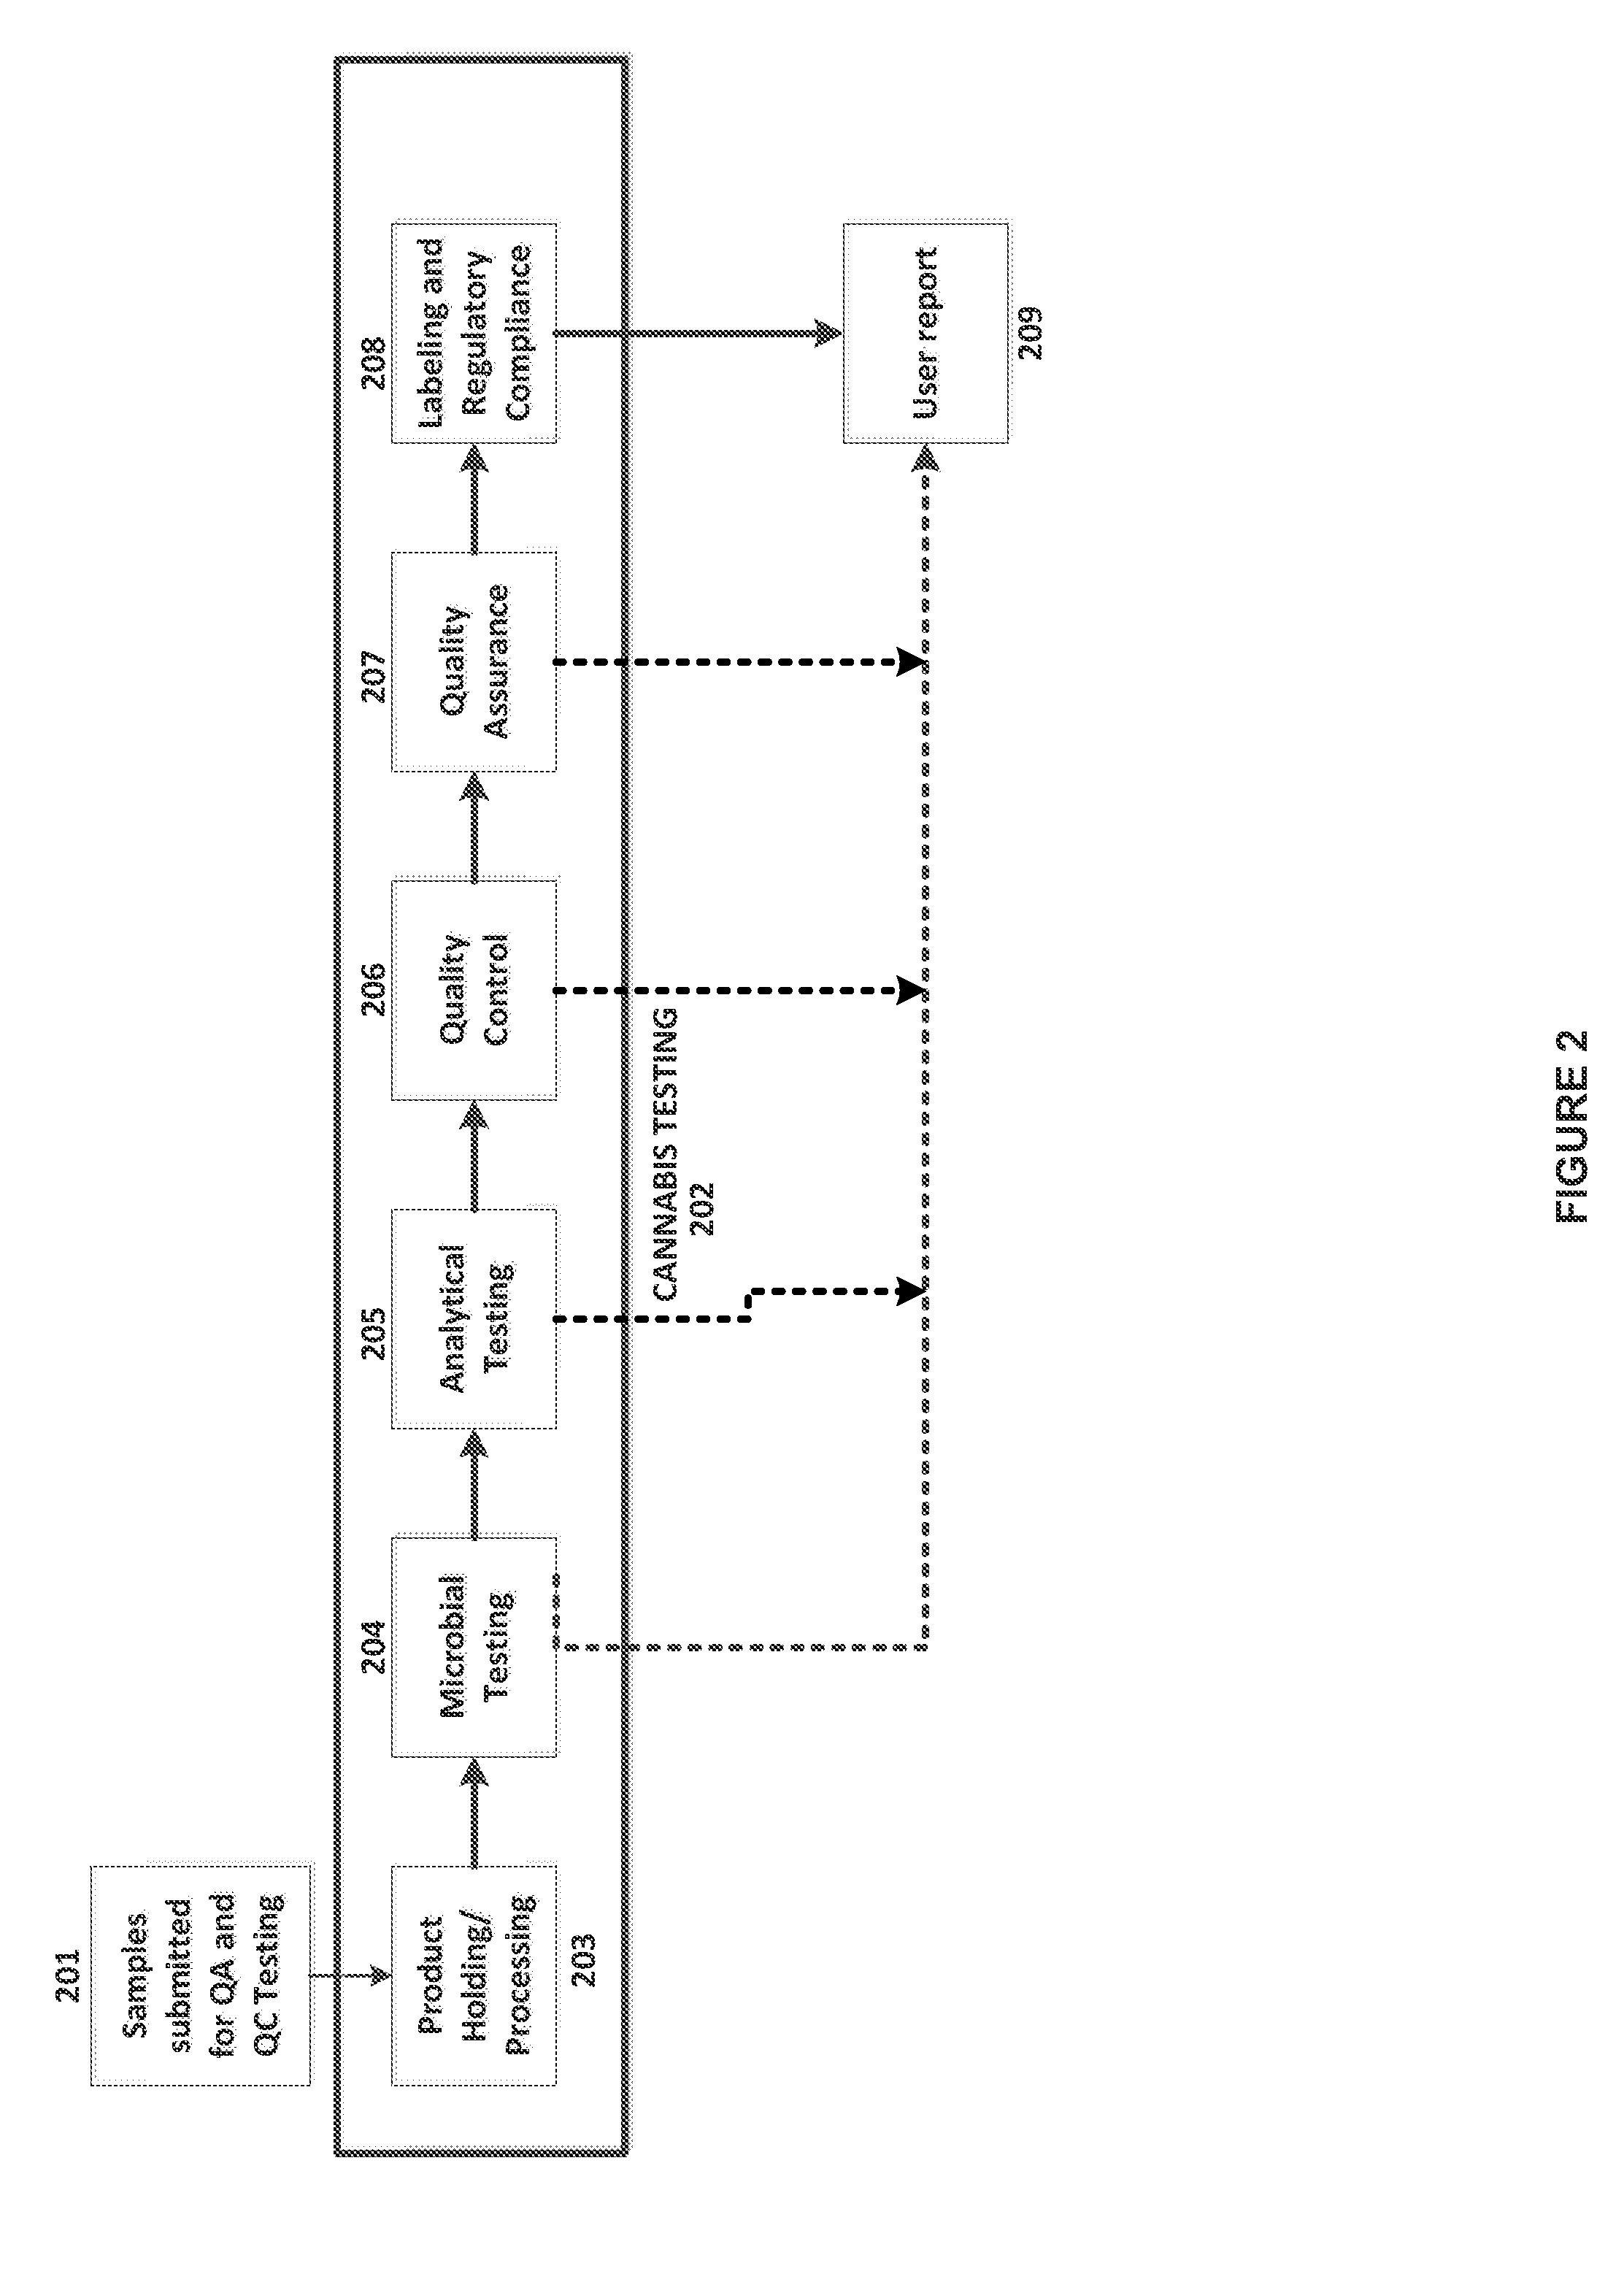 Integrated Systems and Methods of Evaluating Cannabis and Cannabinoid Products for Public Safety, Quality Control and Quality Assurance Purposes